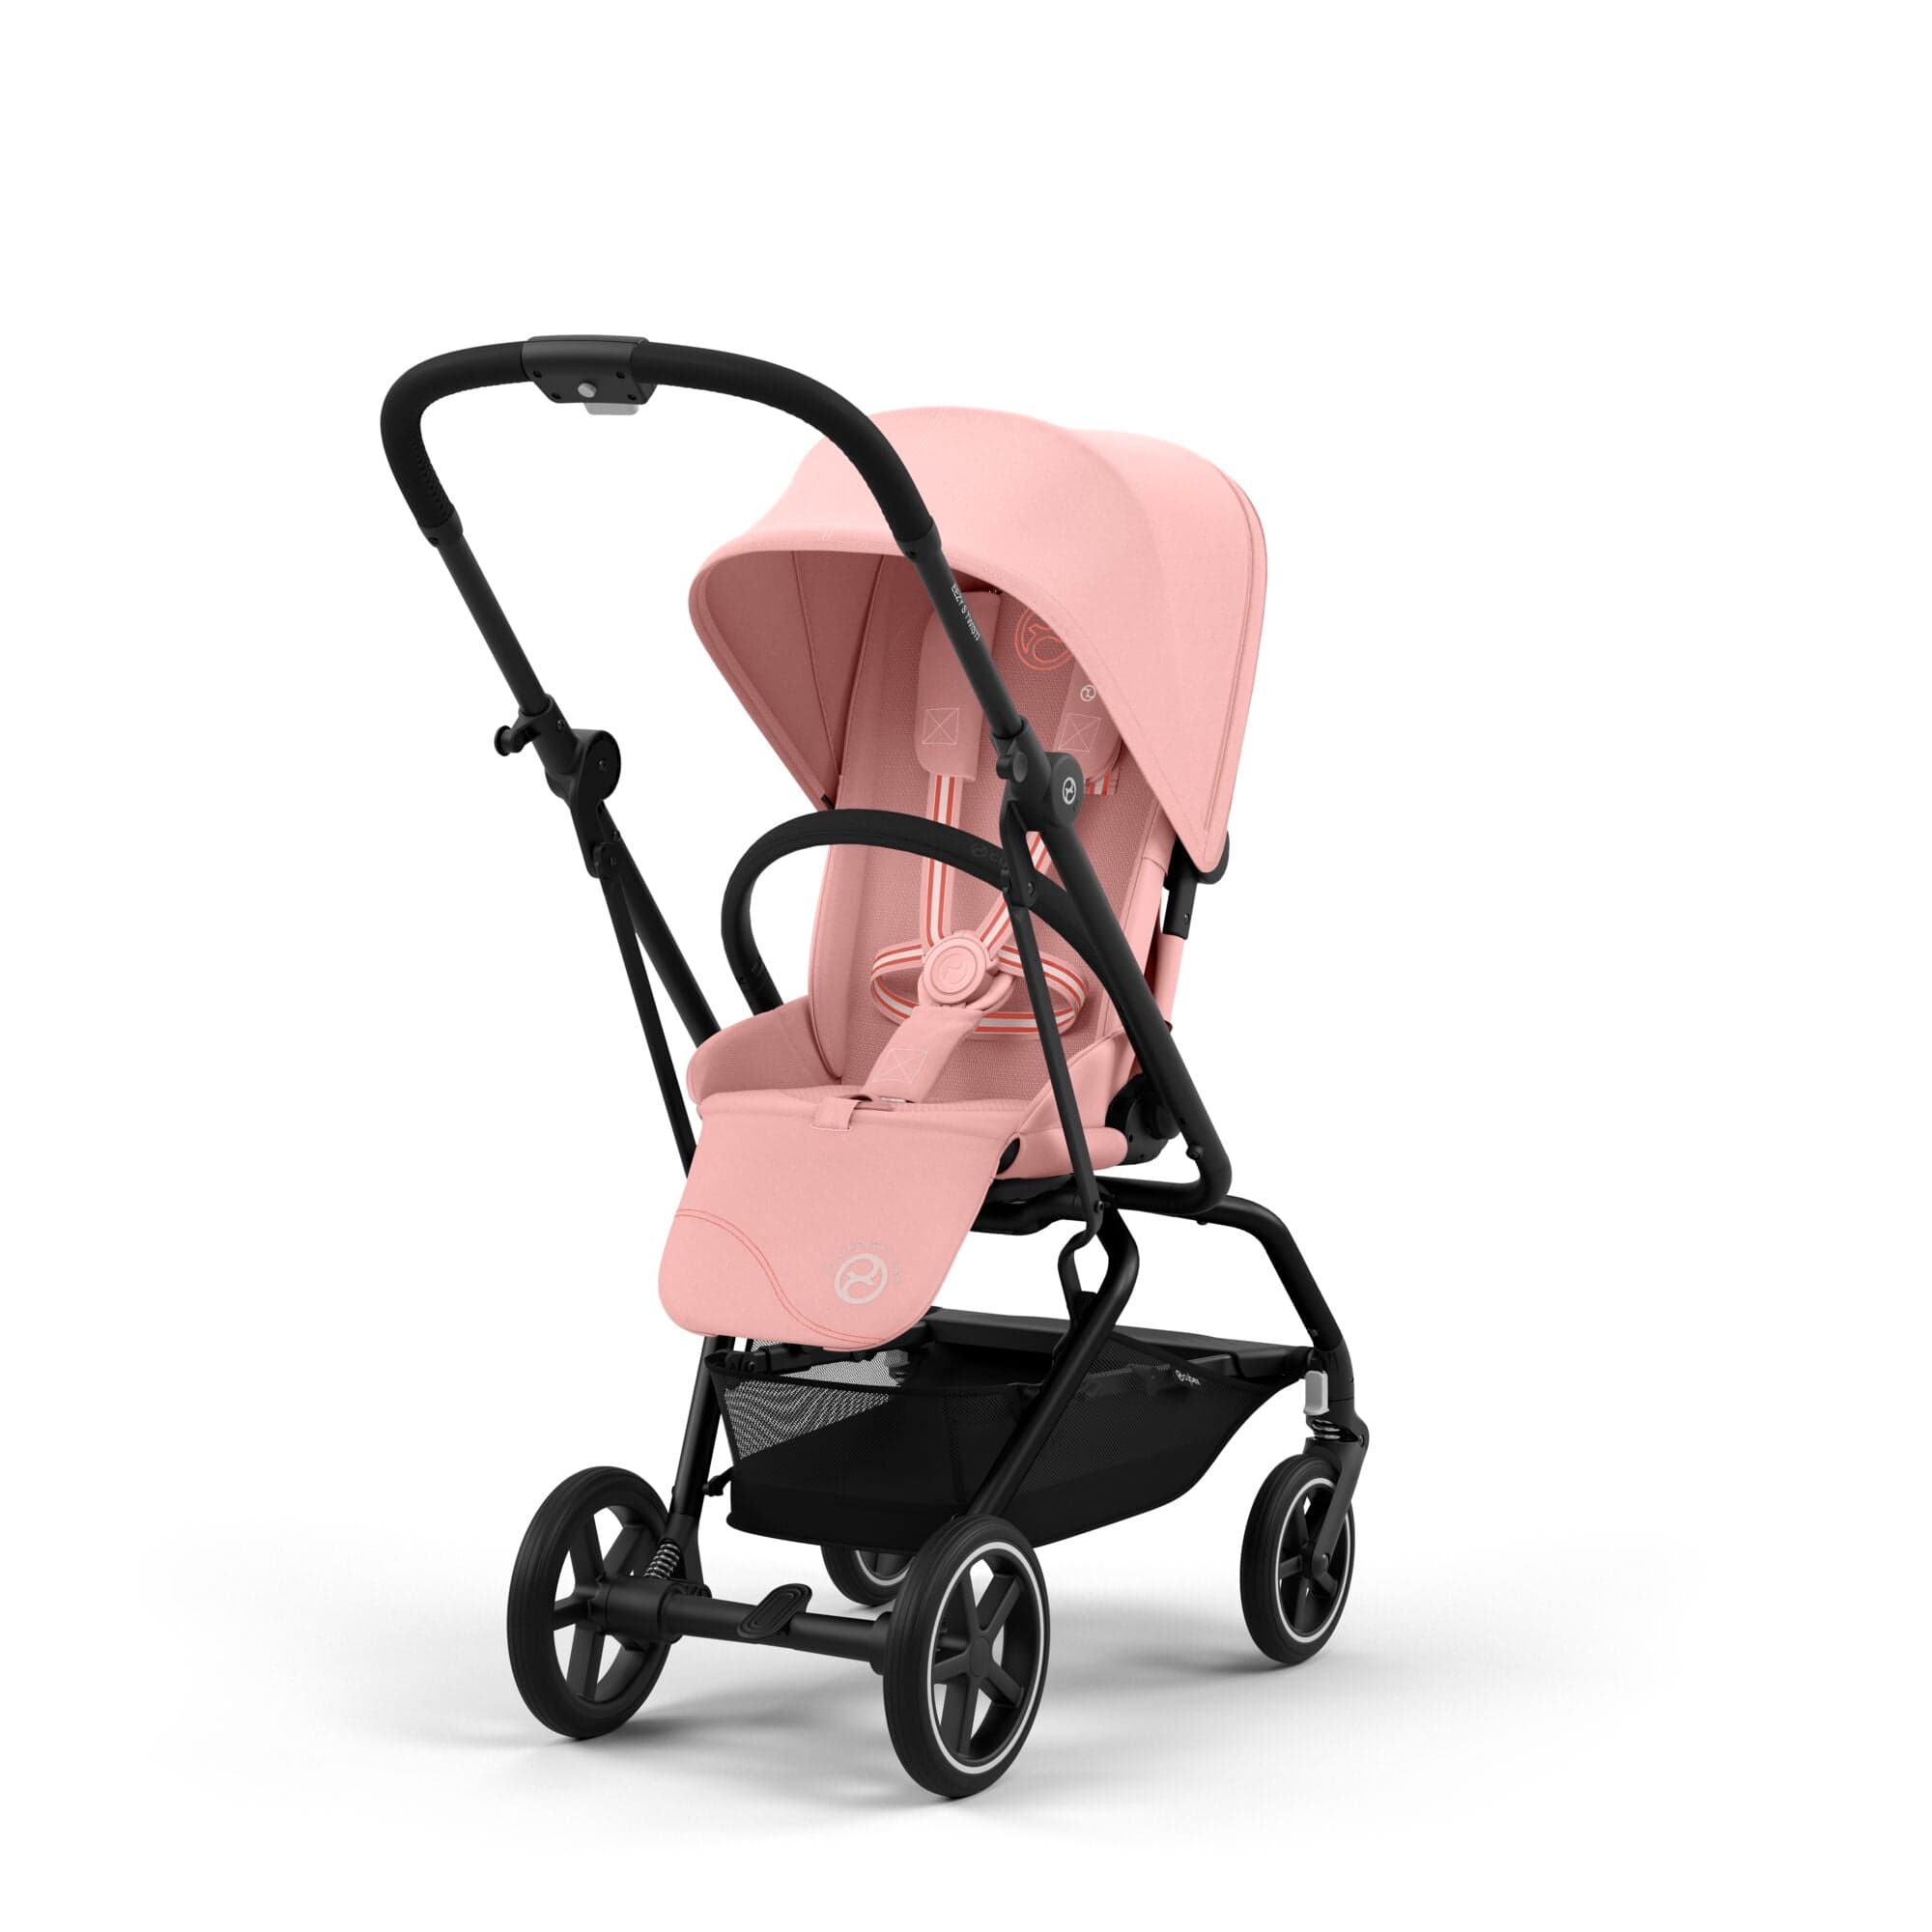 Cybex Eezy S Twist+ 2 in Candy Pink/Light Pink Pushchairs & Buggies 524000123 4063846450503